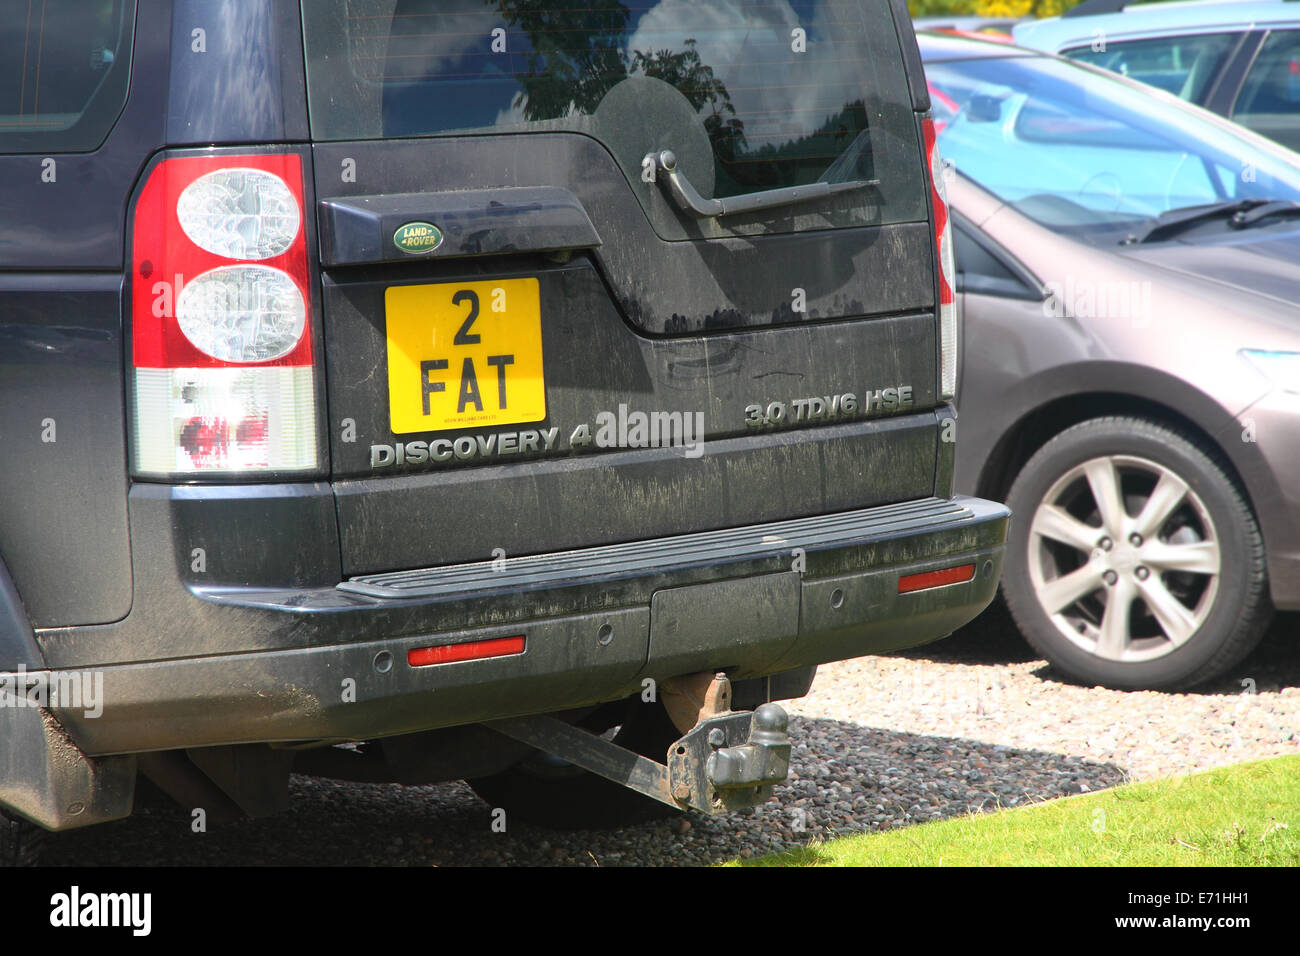 '2 FAT' cherished registration on a dirty Land Rover Discovery spotted in a Perthshire car park, Scotland Stock Photo